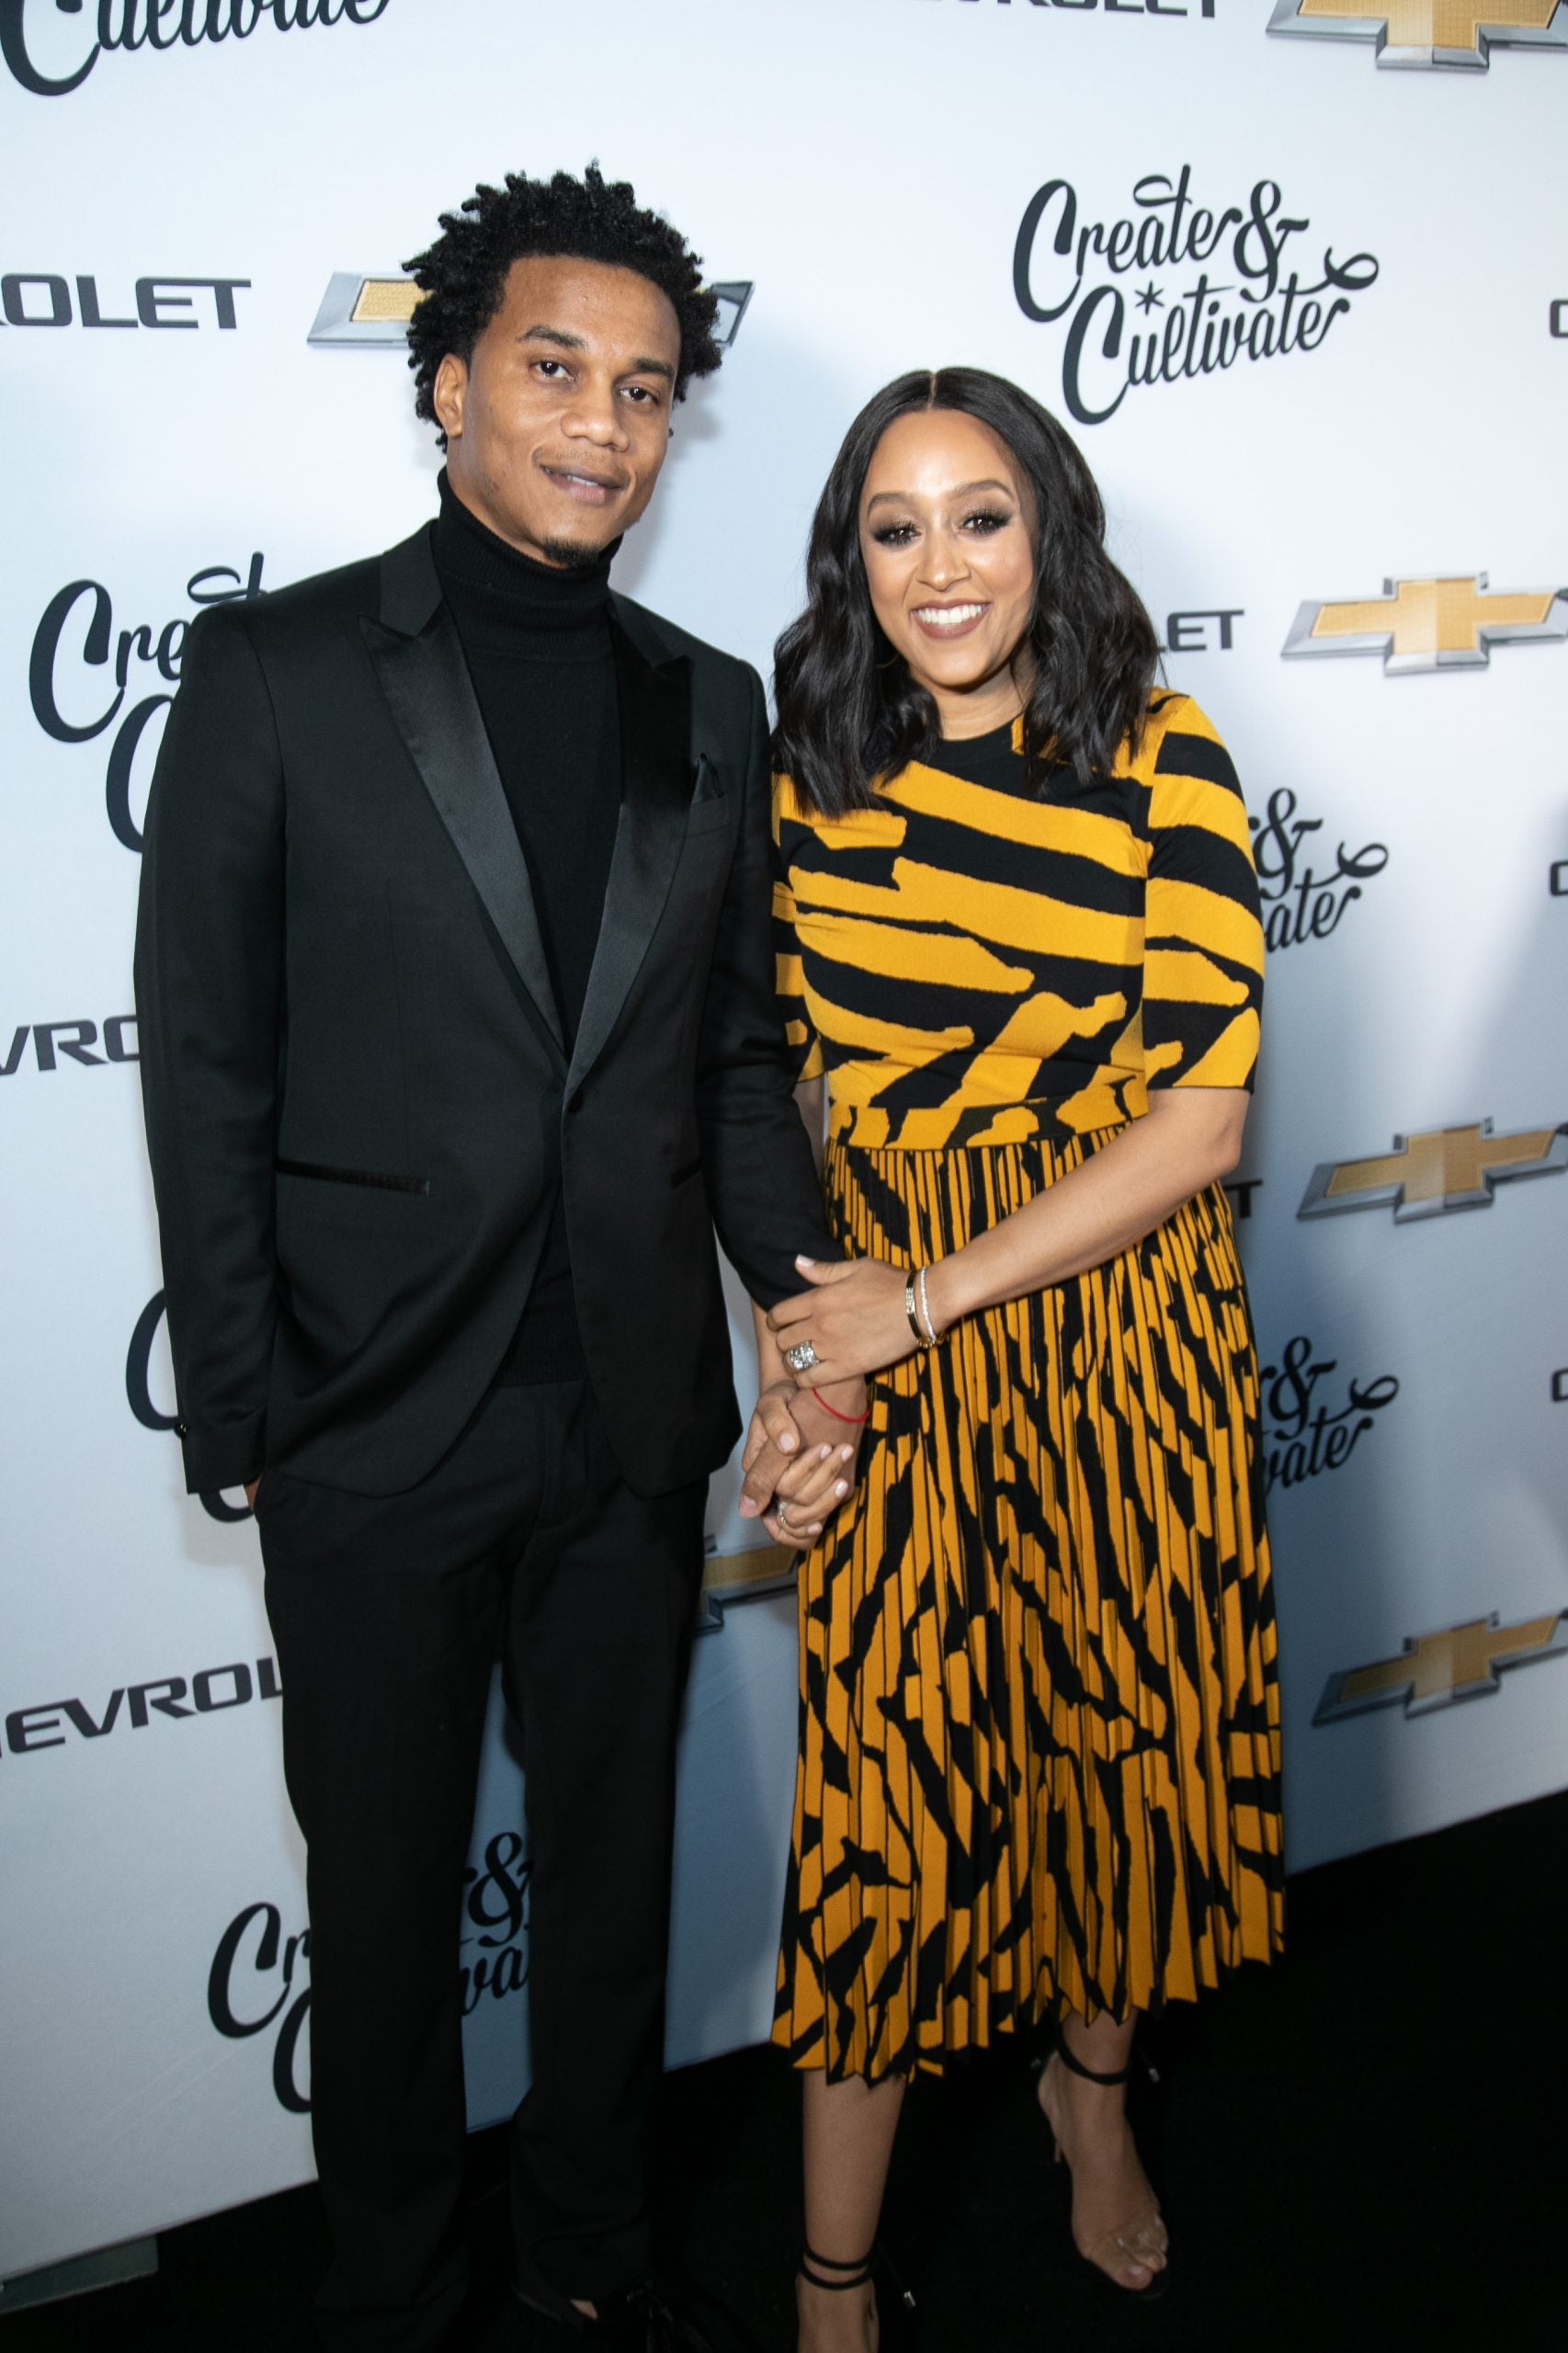 Tia Mowry Files For Divorce From Cory Hardrict After 14 Years Of Marriage; A Timeline Of Their Relationship